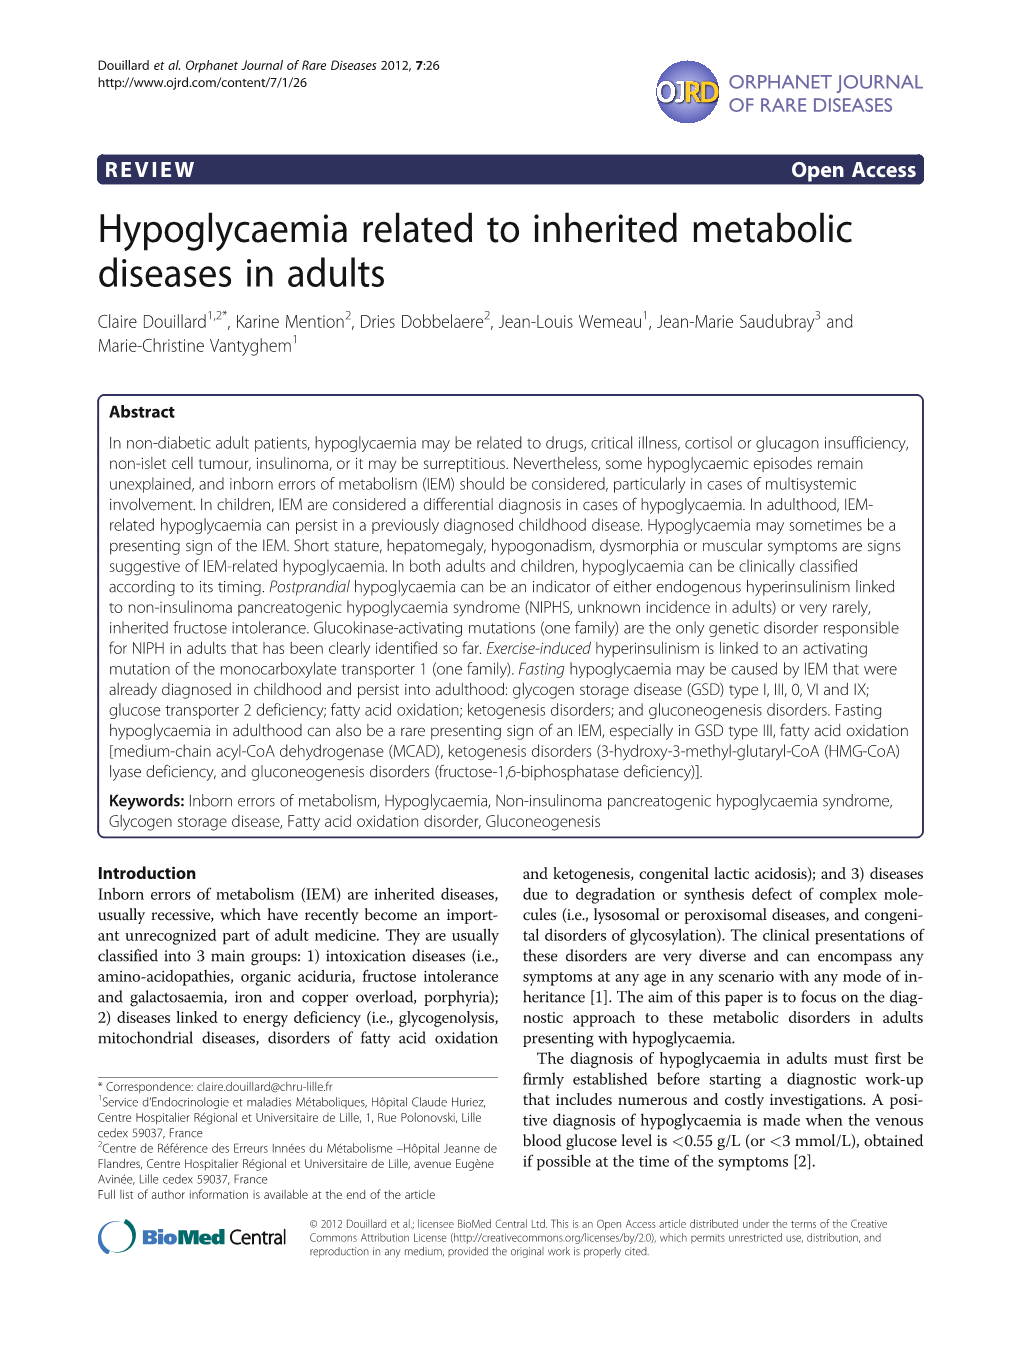 Hypoglycaemia Related to Inherited Metabolic Diseases in Adults